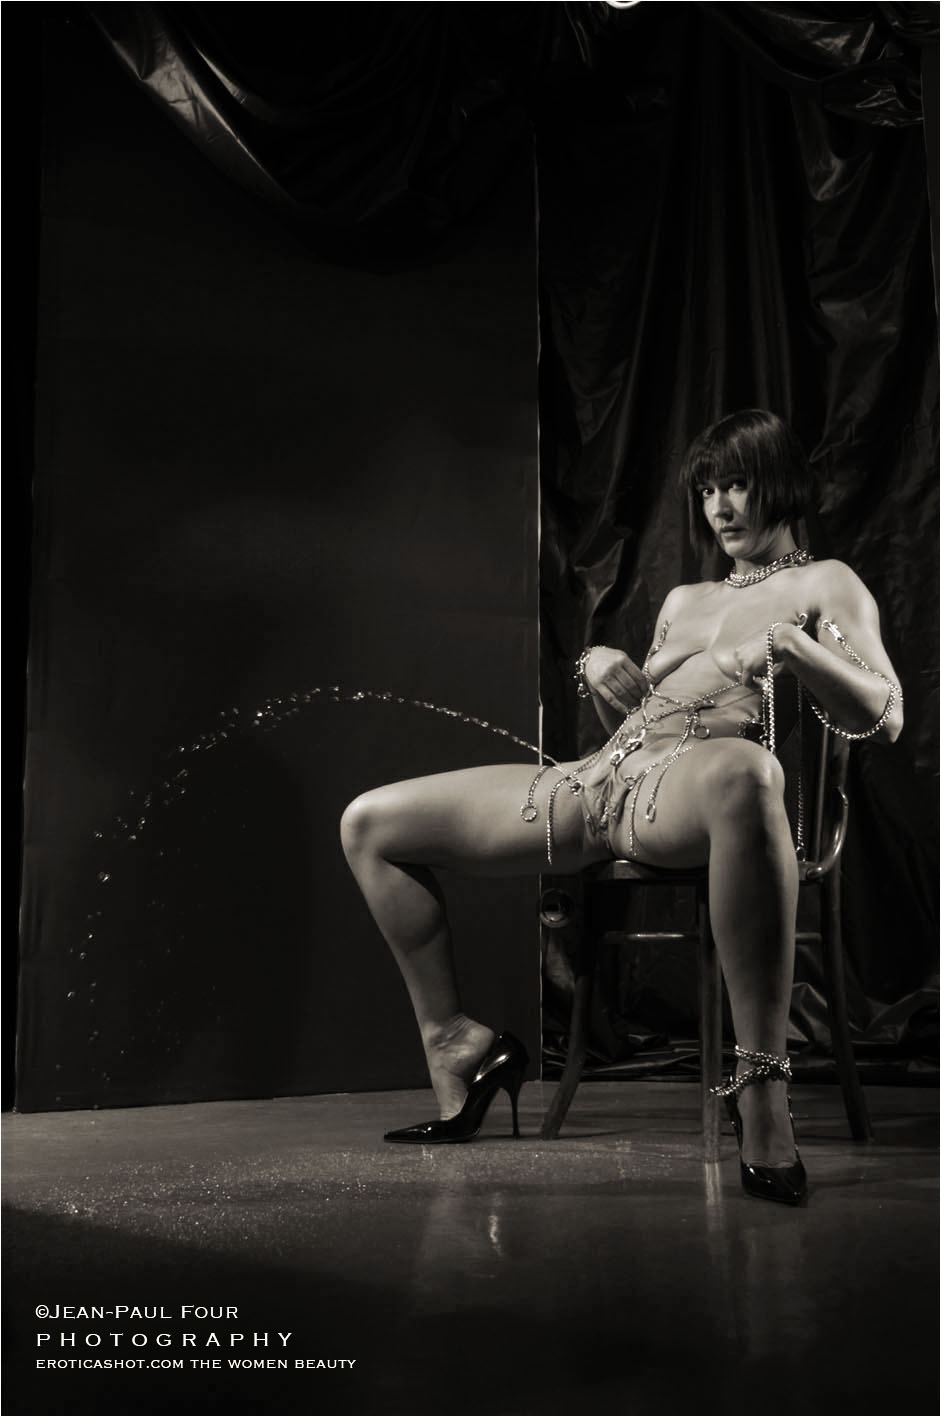 Linda, slave, bitch, extreme model, extreme sub, pussy and tits torture, pee game, suspension, wax game, follow her on eroticashot.com, pict by Jean-Paul Four